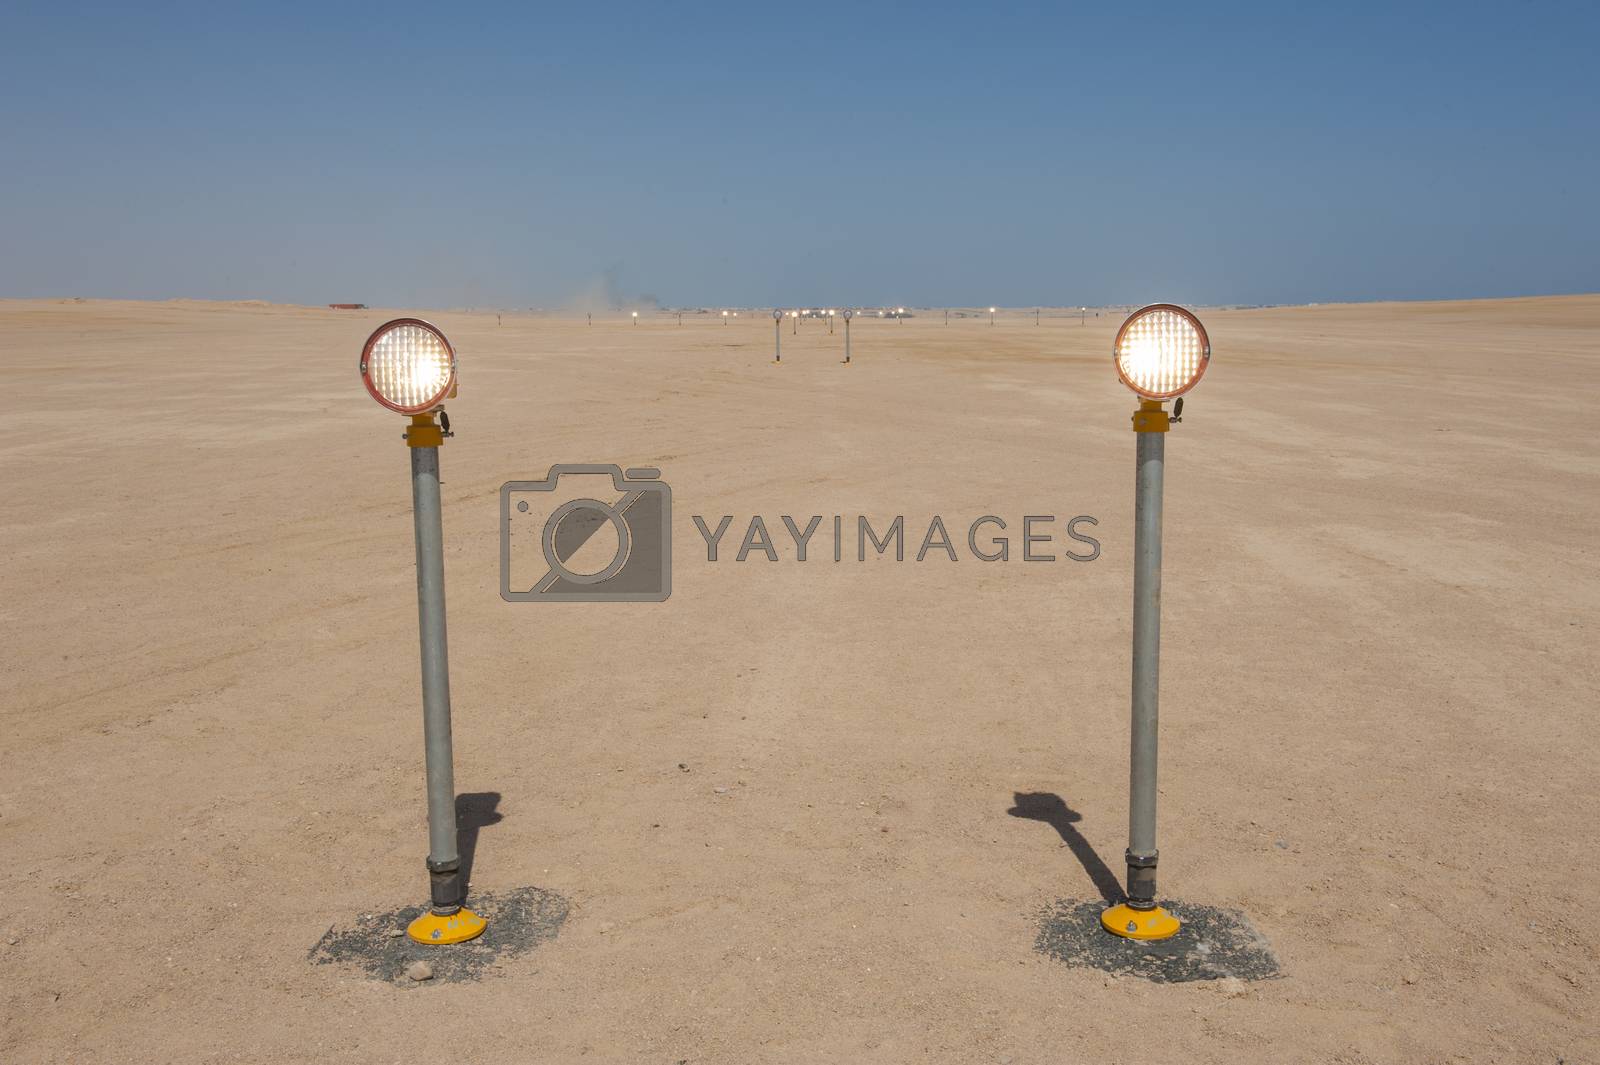 Royalty free image of Approach lights at an airport runway by paulvinten